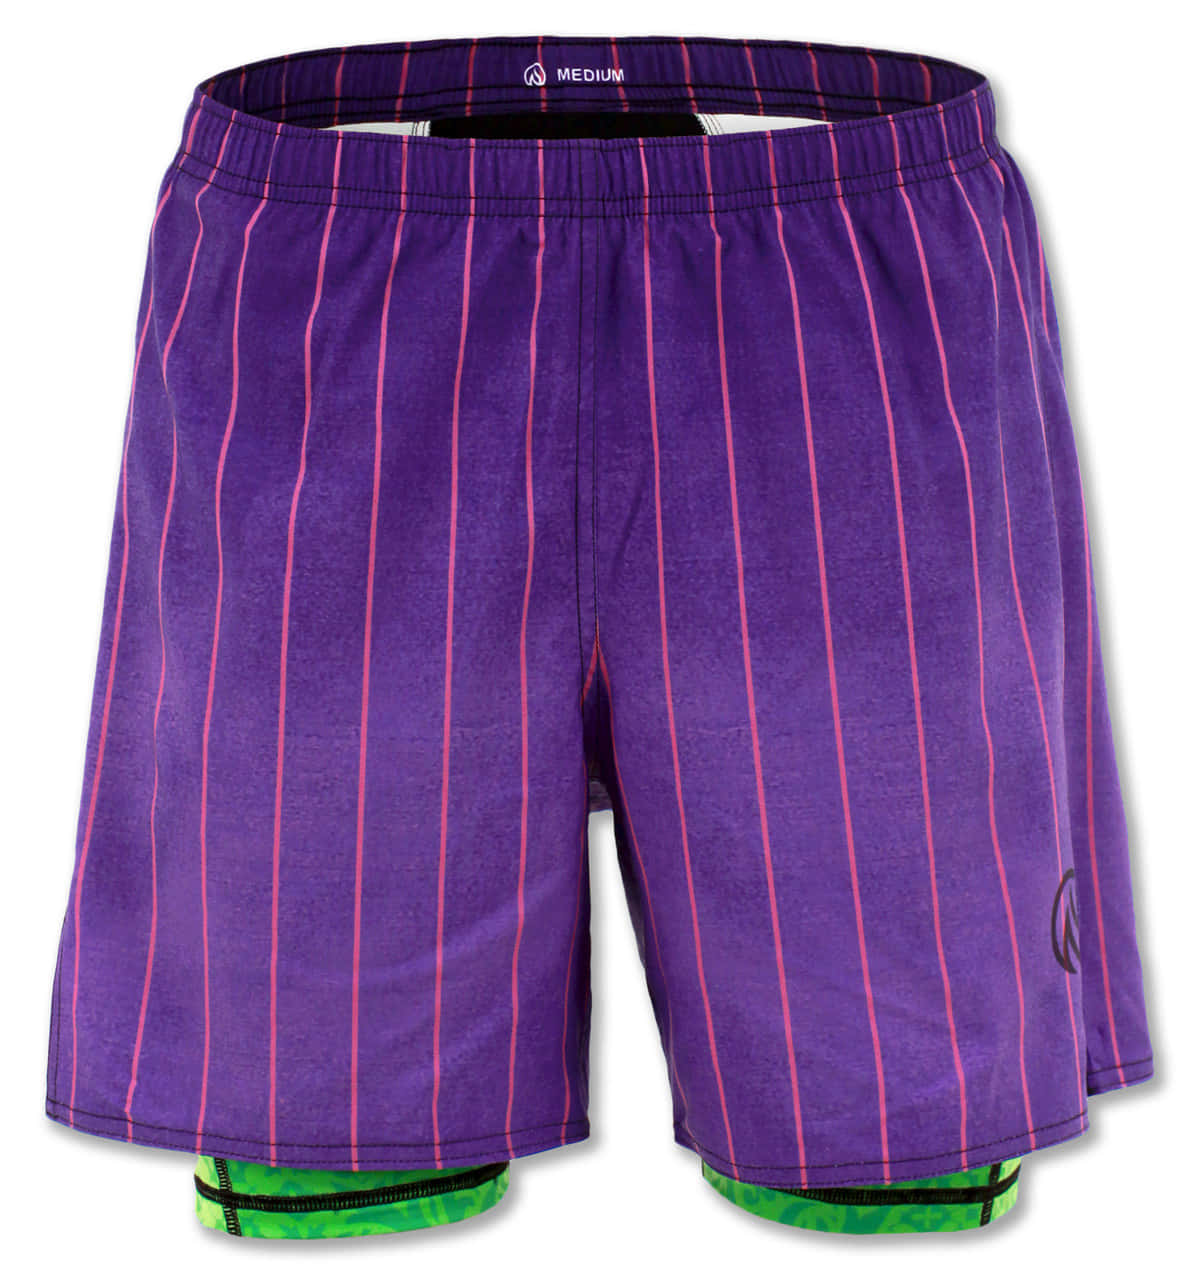 "Look stylish in these vibrant purple shorts!" Wallpaper